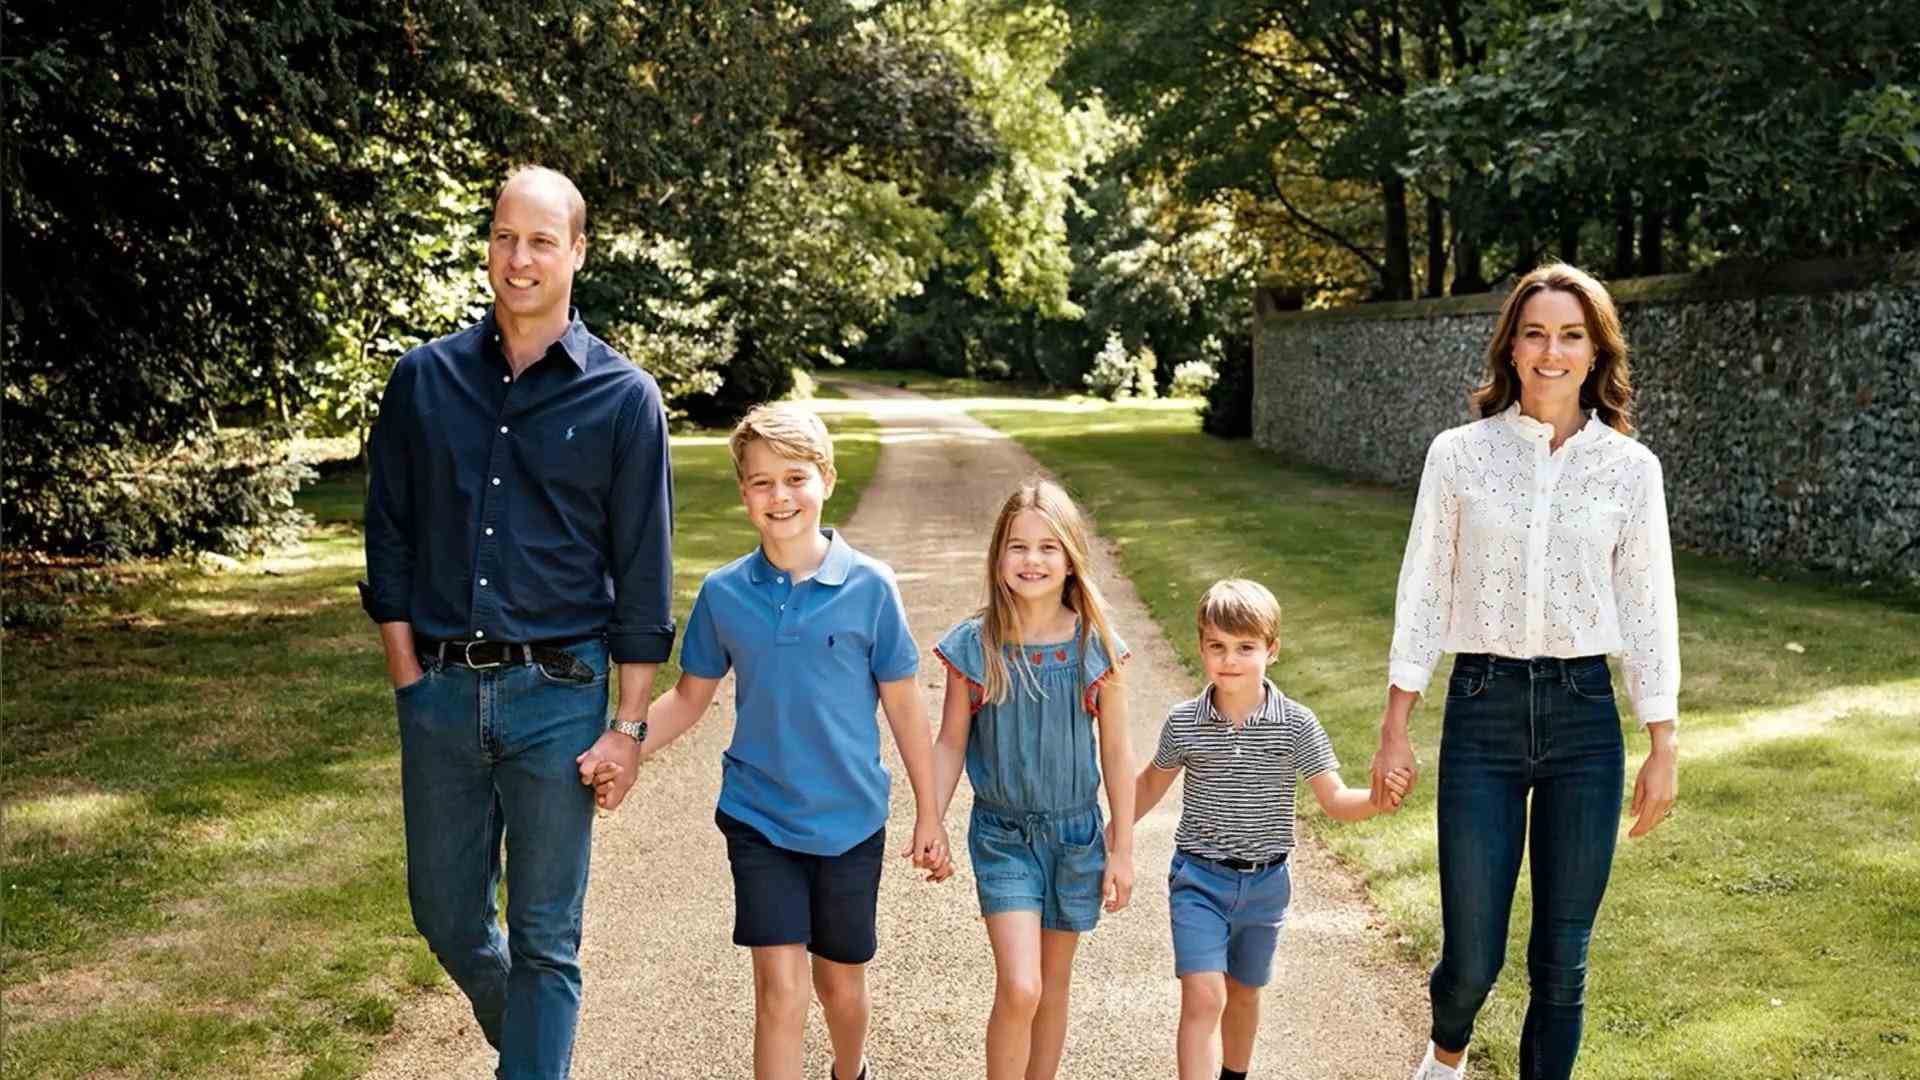 Here Prince George takes the lead body language expert reveals